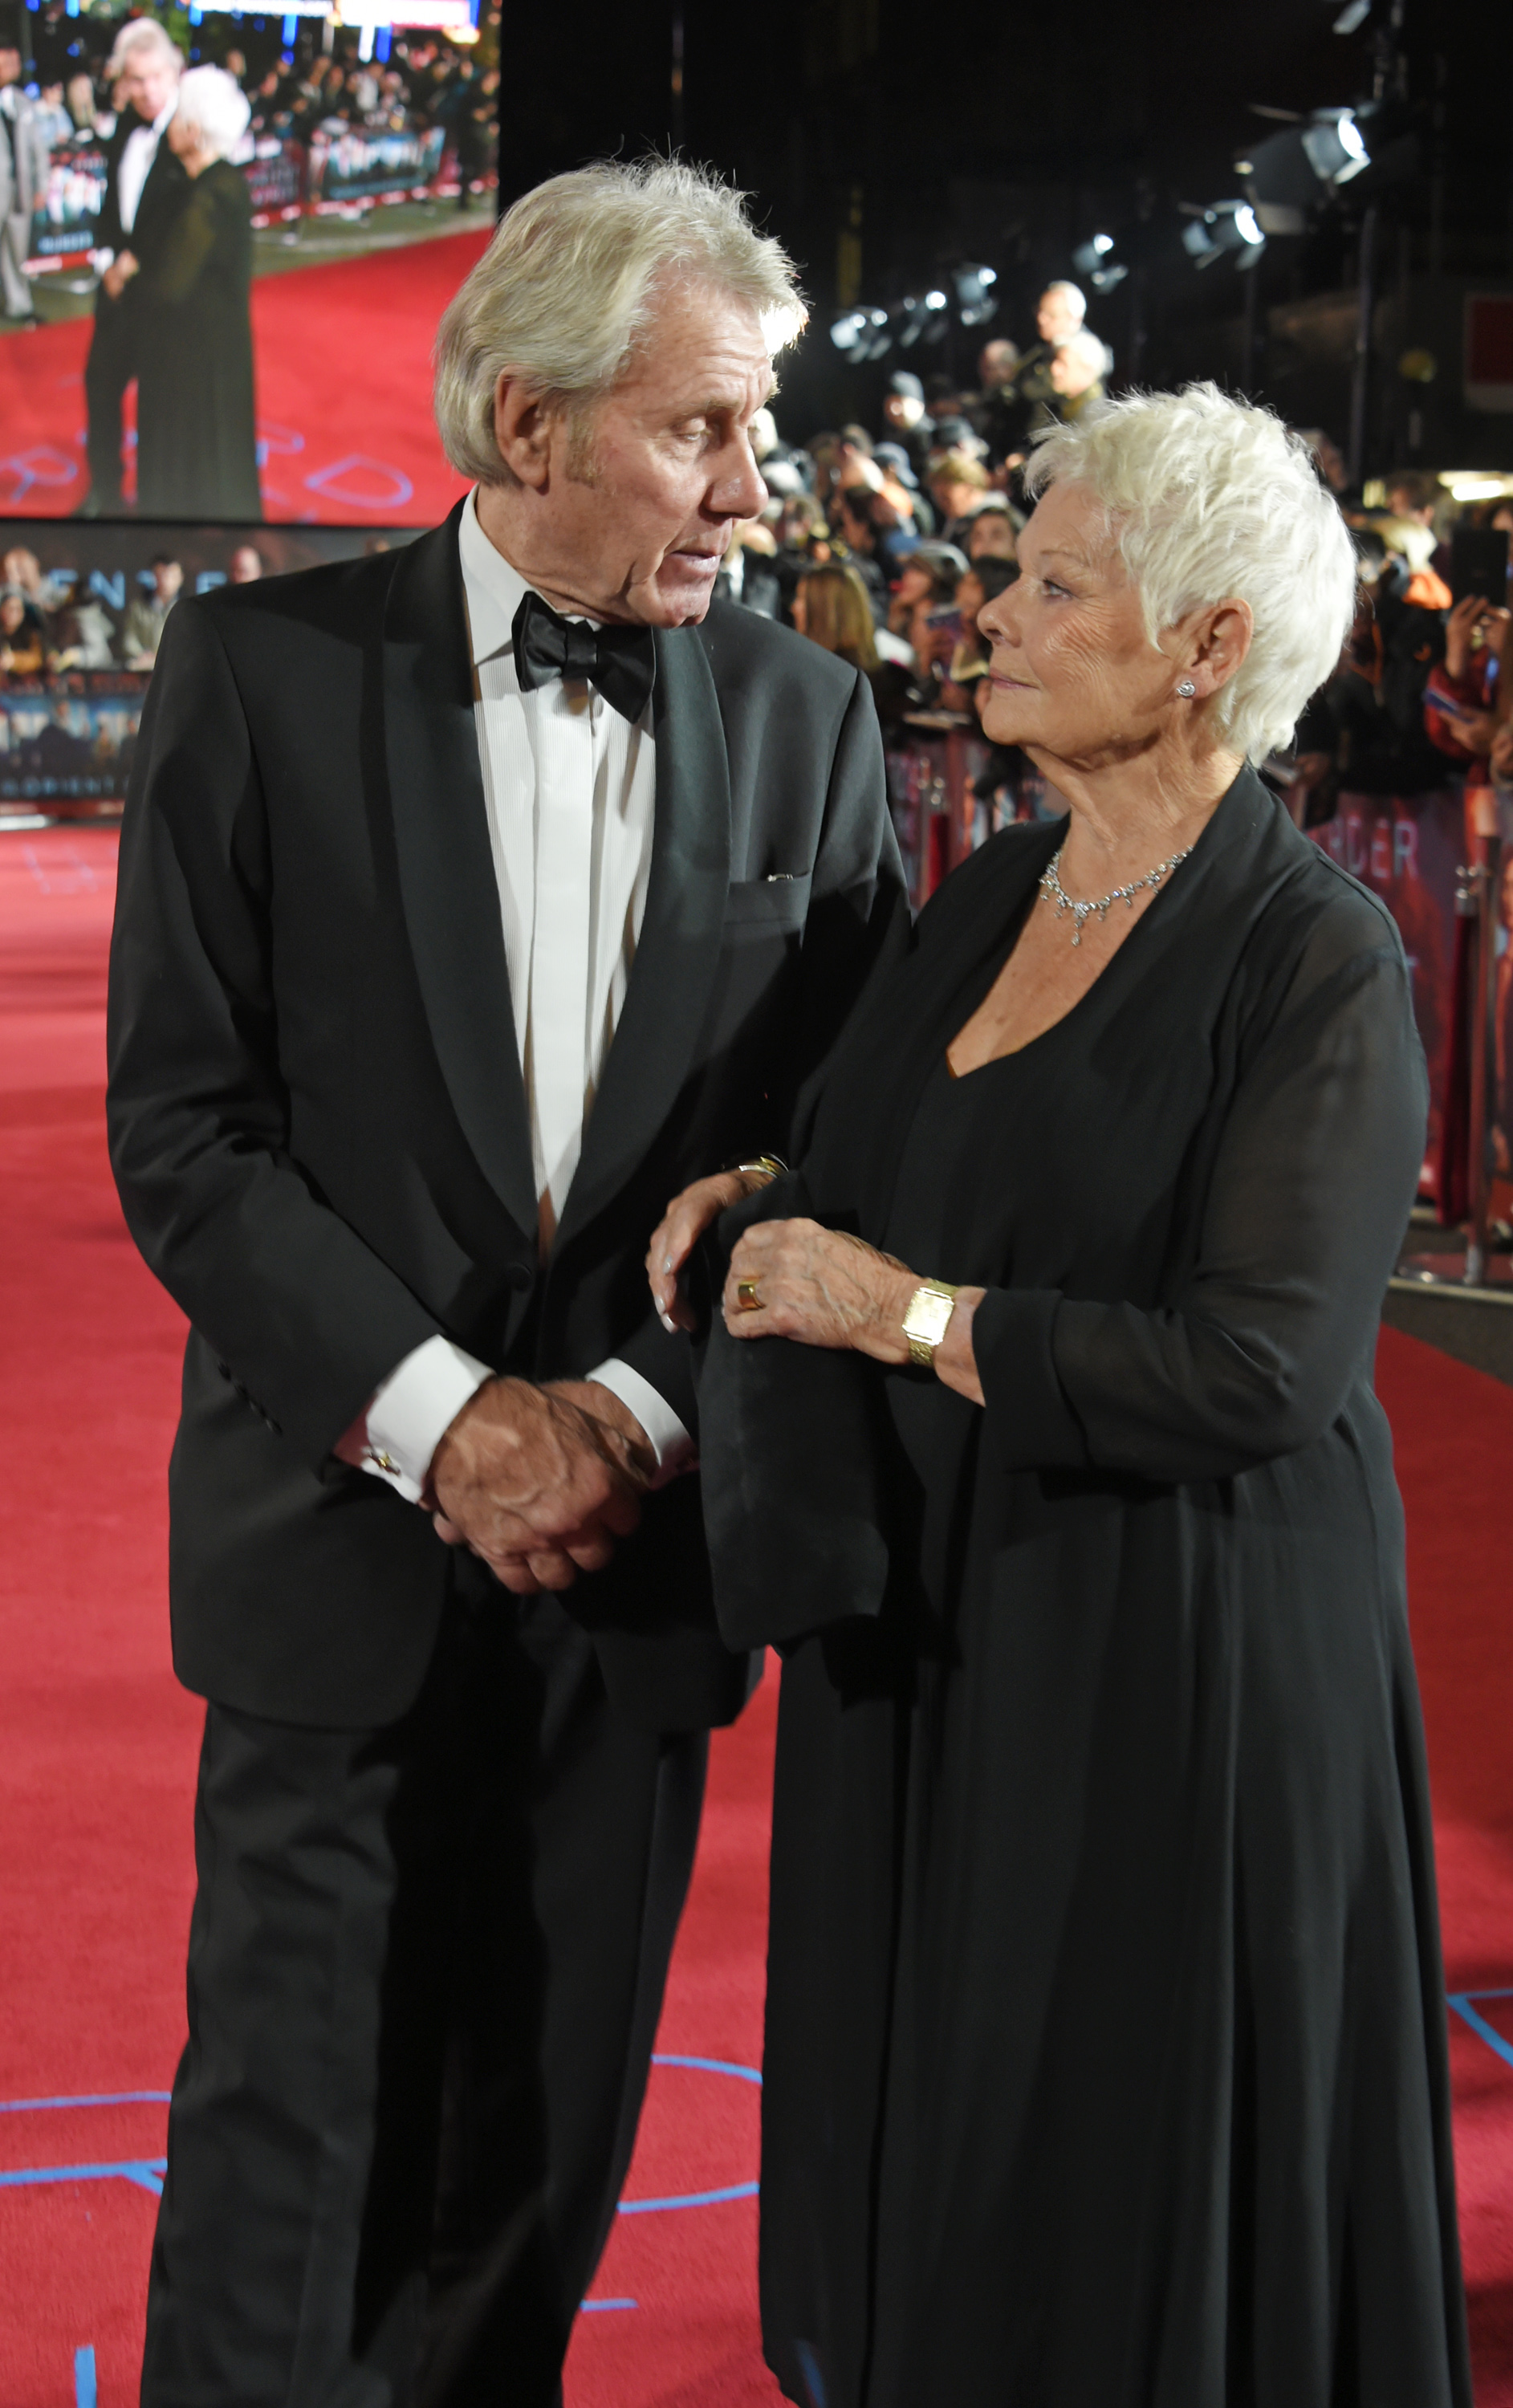 David Mills and Dame Judi Dench at the "Murder on the Orient Express" world premiere in London, 2017 | Source: Getty Images